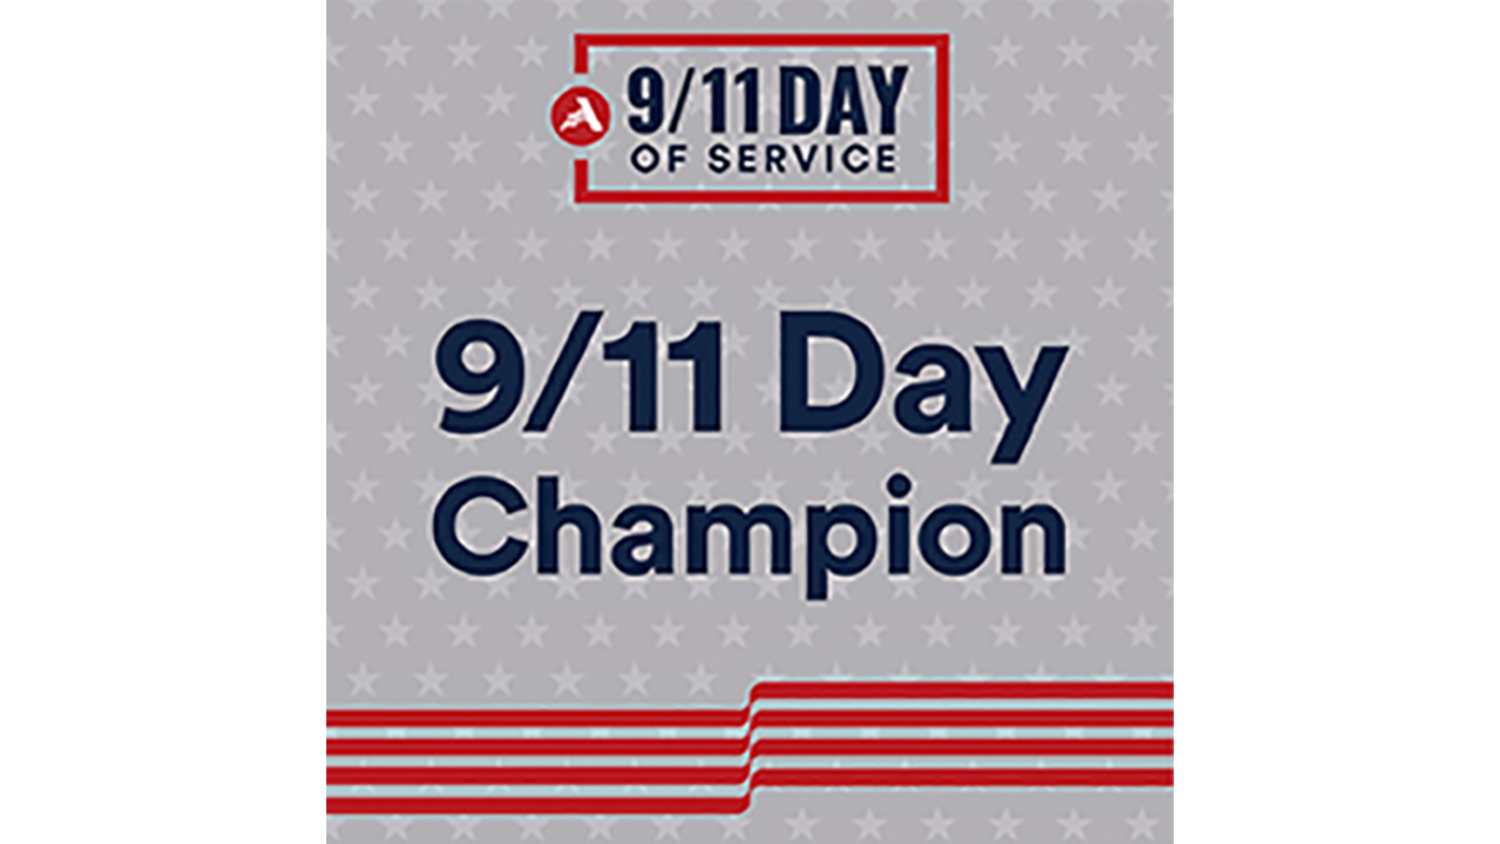 Become a 9/11 Day Champion